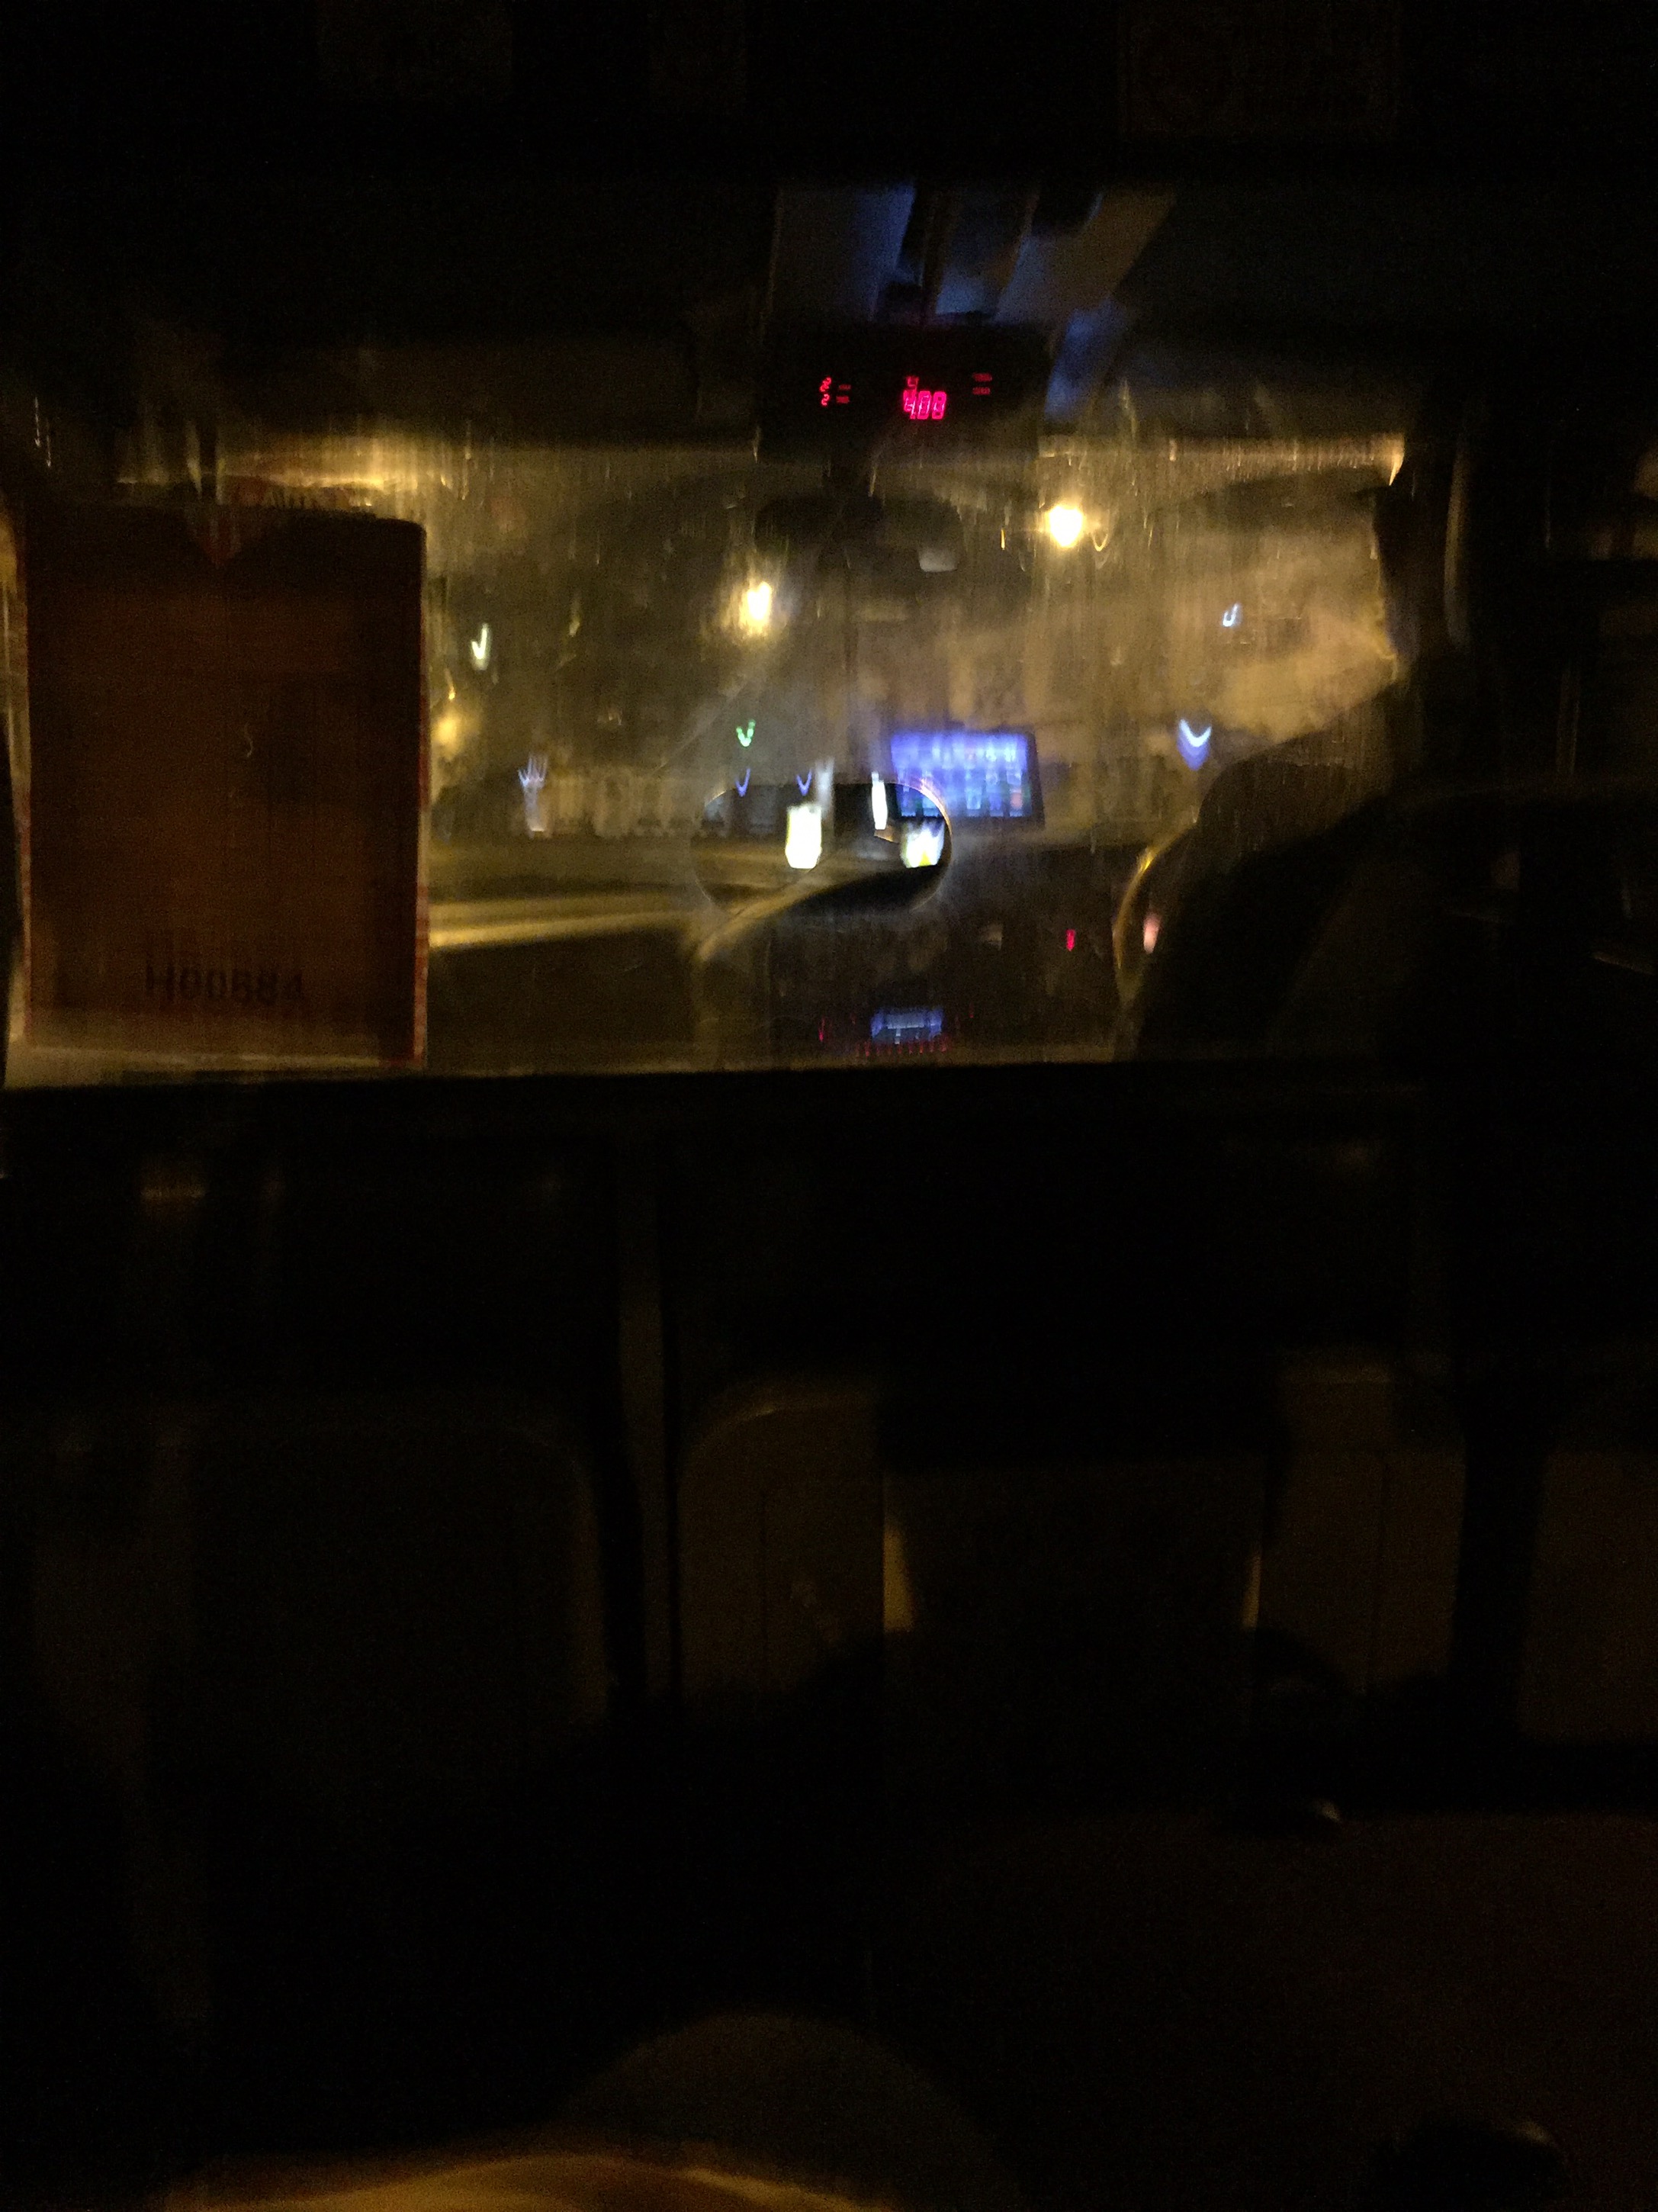 a view from inside a bus at night